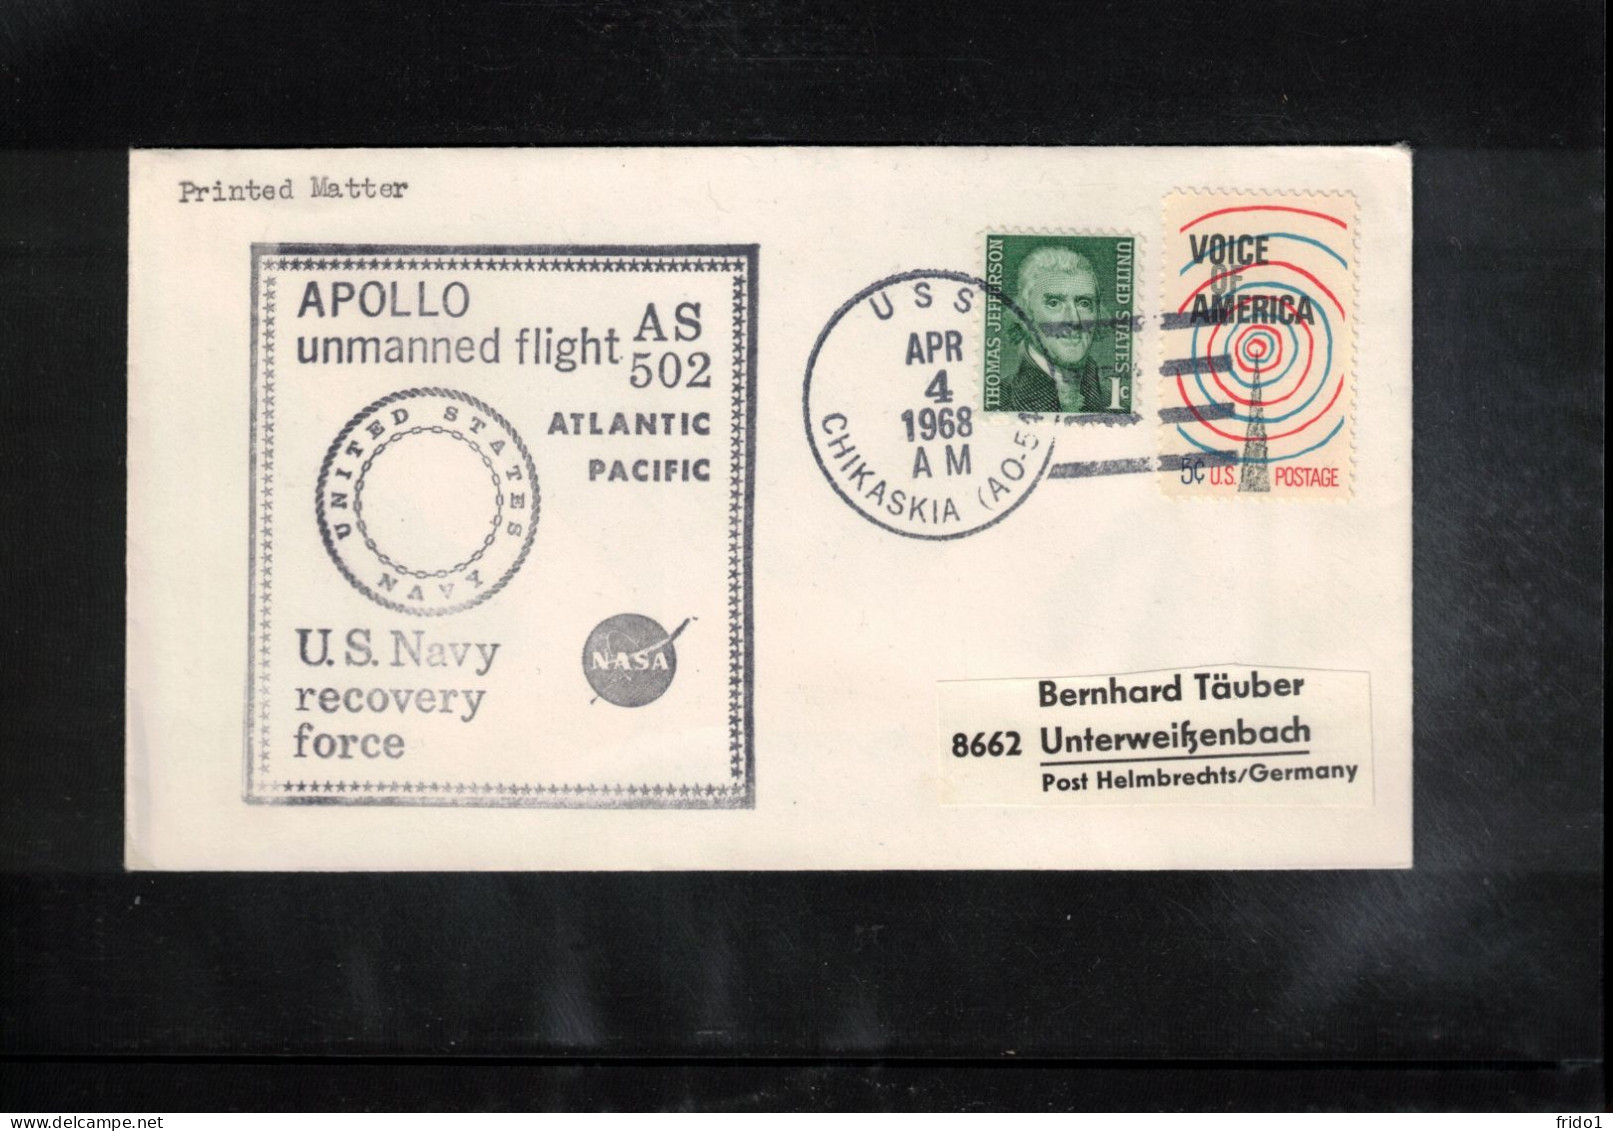 USA 1968 Space / Weltraum Apollo Unmanned Flight AS 502 - US Navy Recovery Force Ship USS Chikaskia Interesting Cover - Etats-Unis